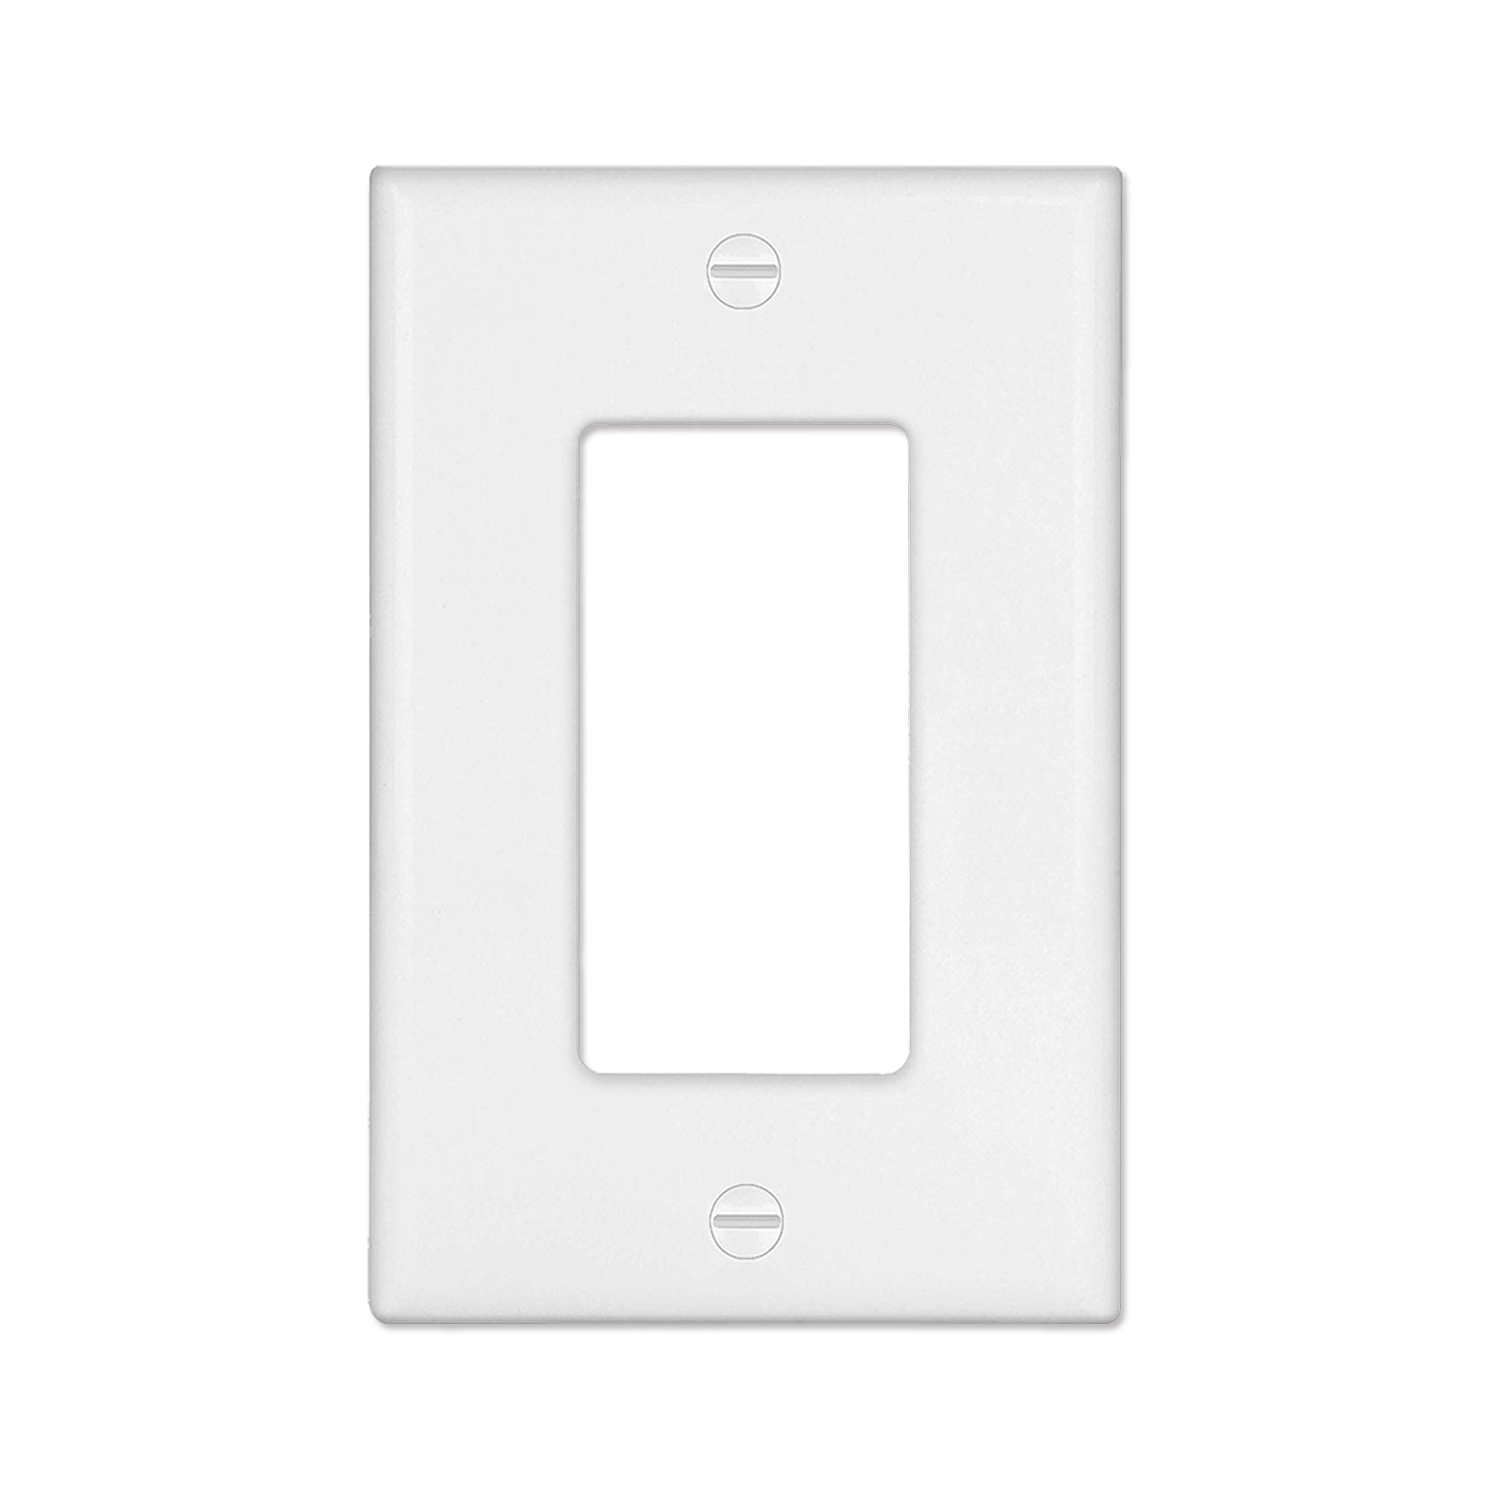 Electrical Wall Plates Outlet Covers and Light Dimmer Knob by BigB3D, Download free STL model